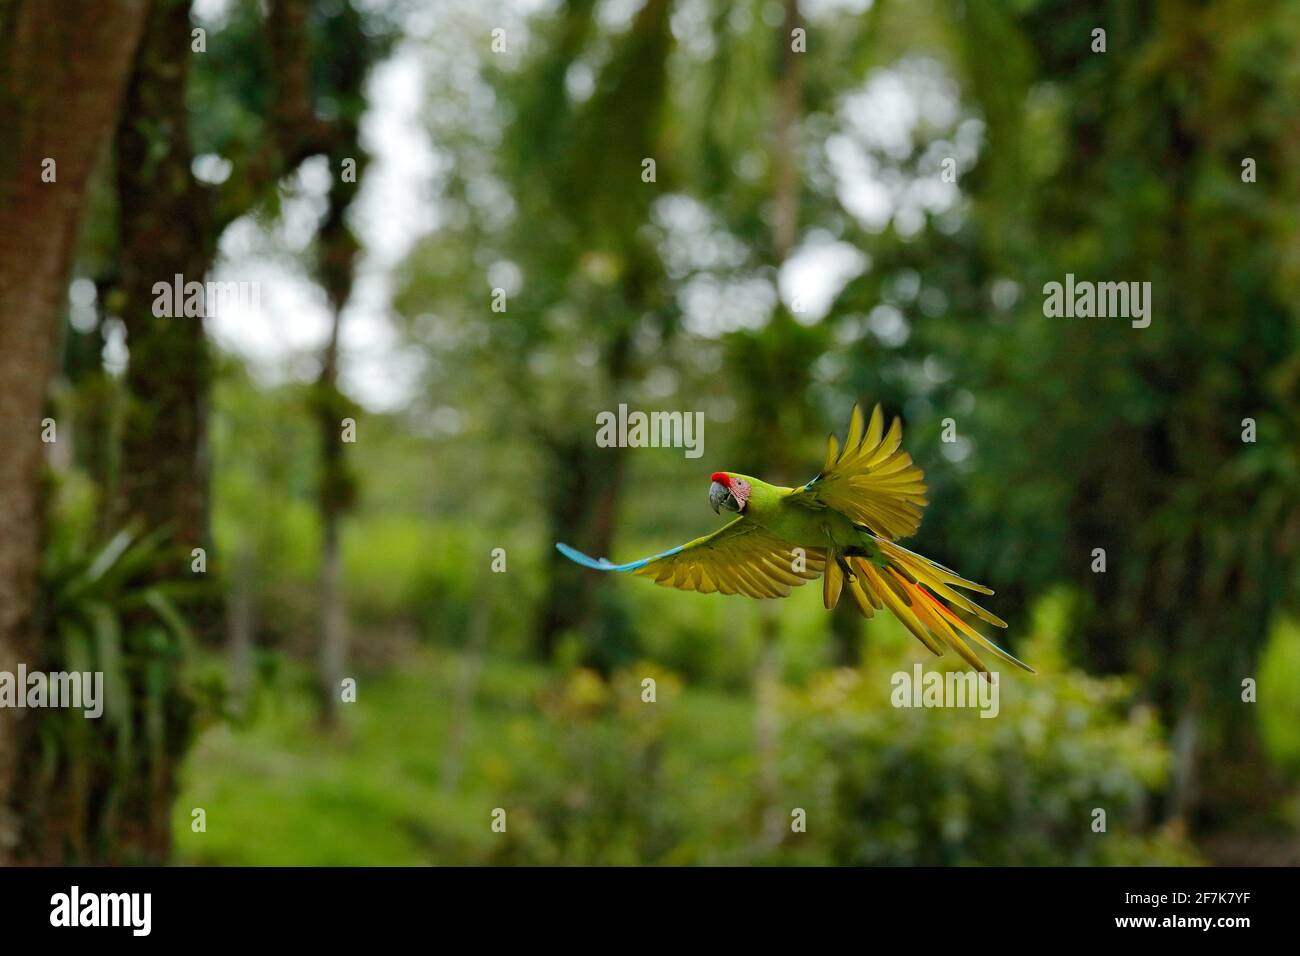 Big parrot in habitat. Endangered parrot, Great green macaw, Ara ambiguus, also known as Buffon's macaw. Wild tropical forest bird, flying with outstr Stock Photo